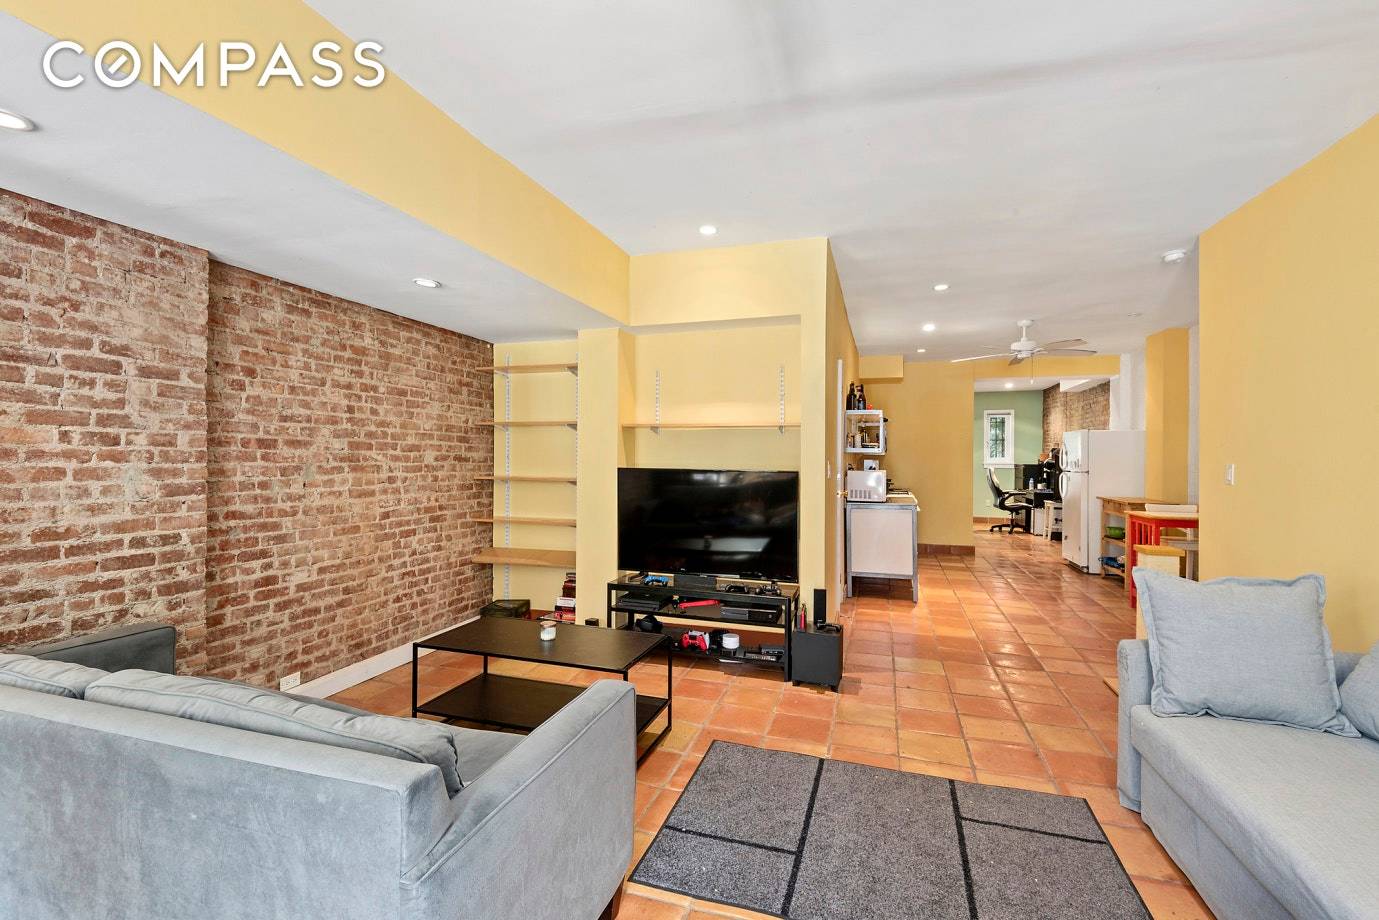 Located on picturesque Doctor's Row in Prospect Lefferts Gardens, this gracious floor through one bedroom is available for September 15th or October 1st.